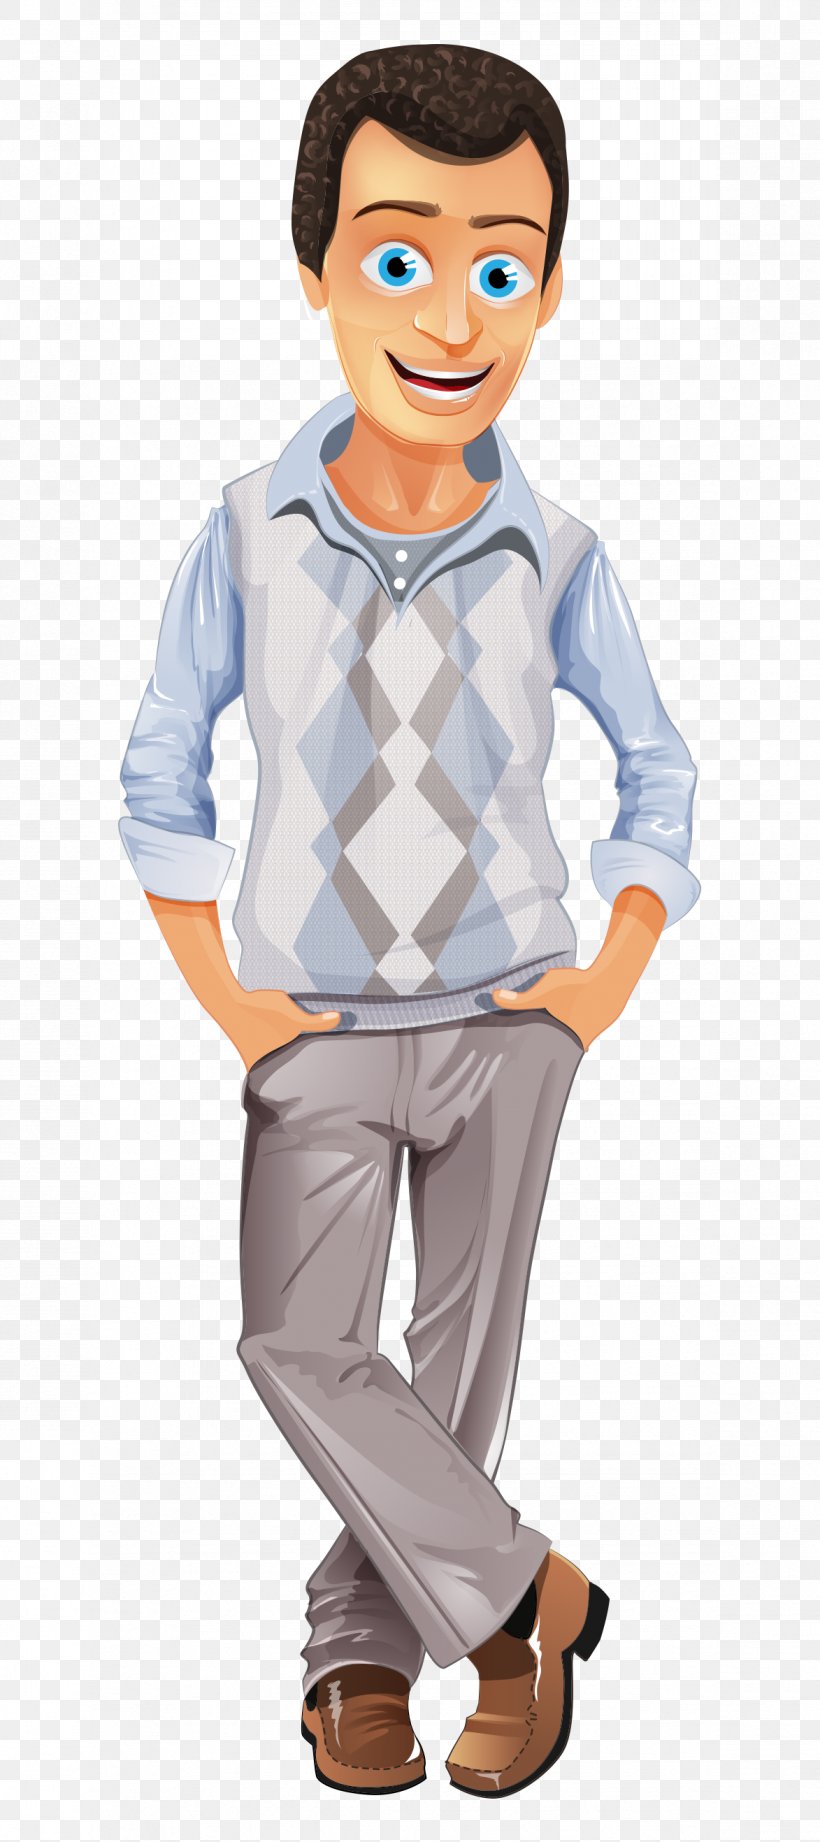 Business Casual Casual Friday Clip Art, PNG, 1173x2635px, Casual, Arm, Boy, Business Casual, Cartoon Download Free